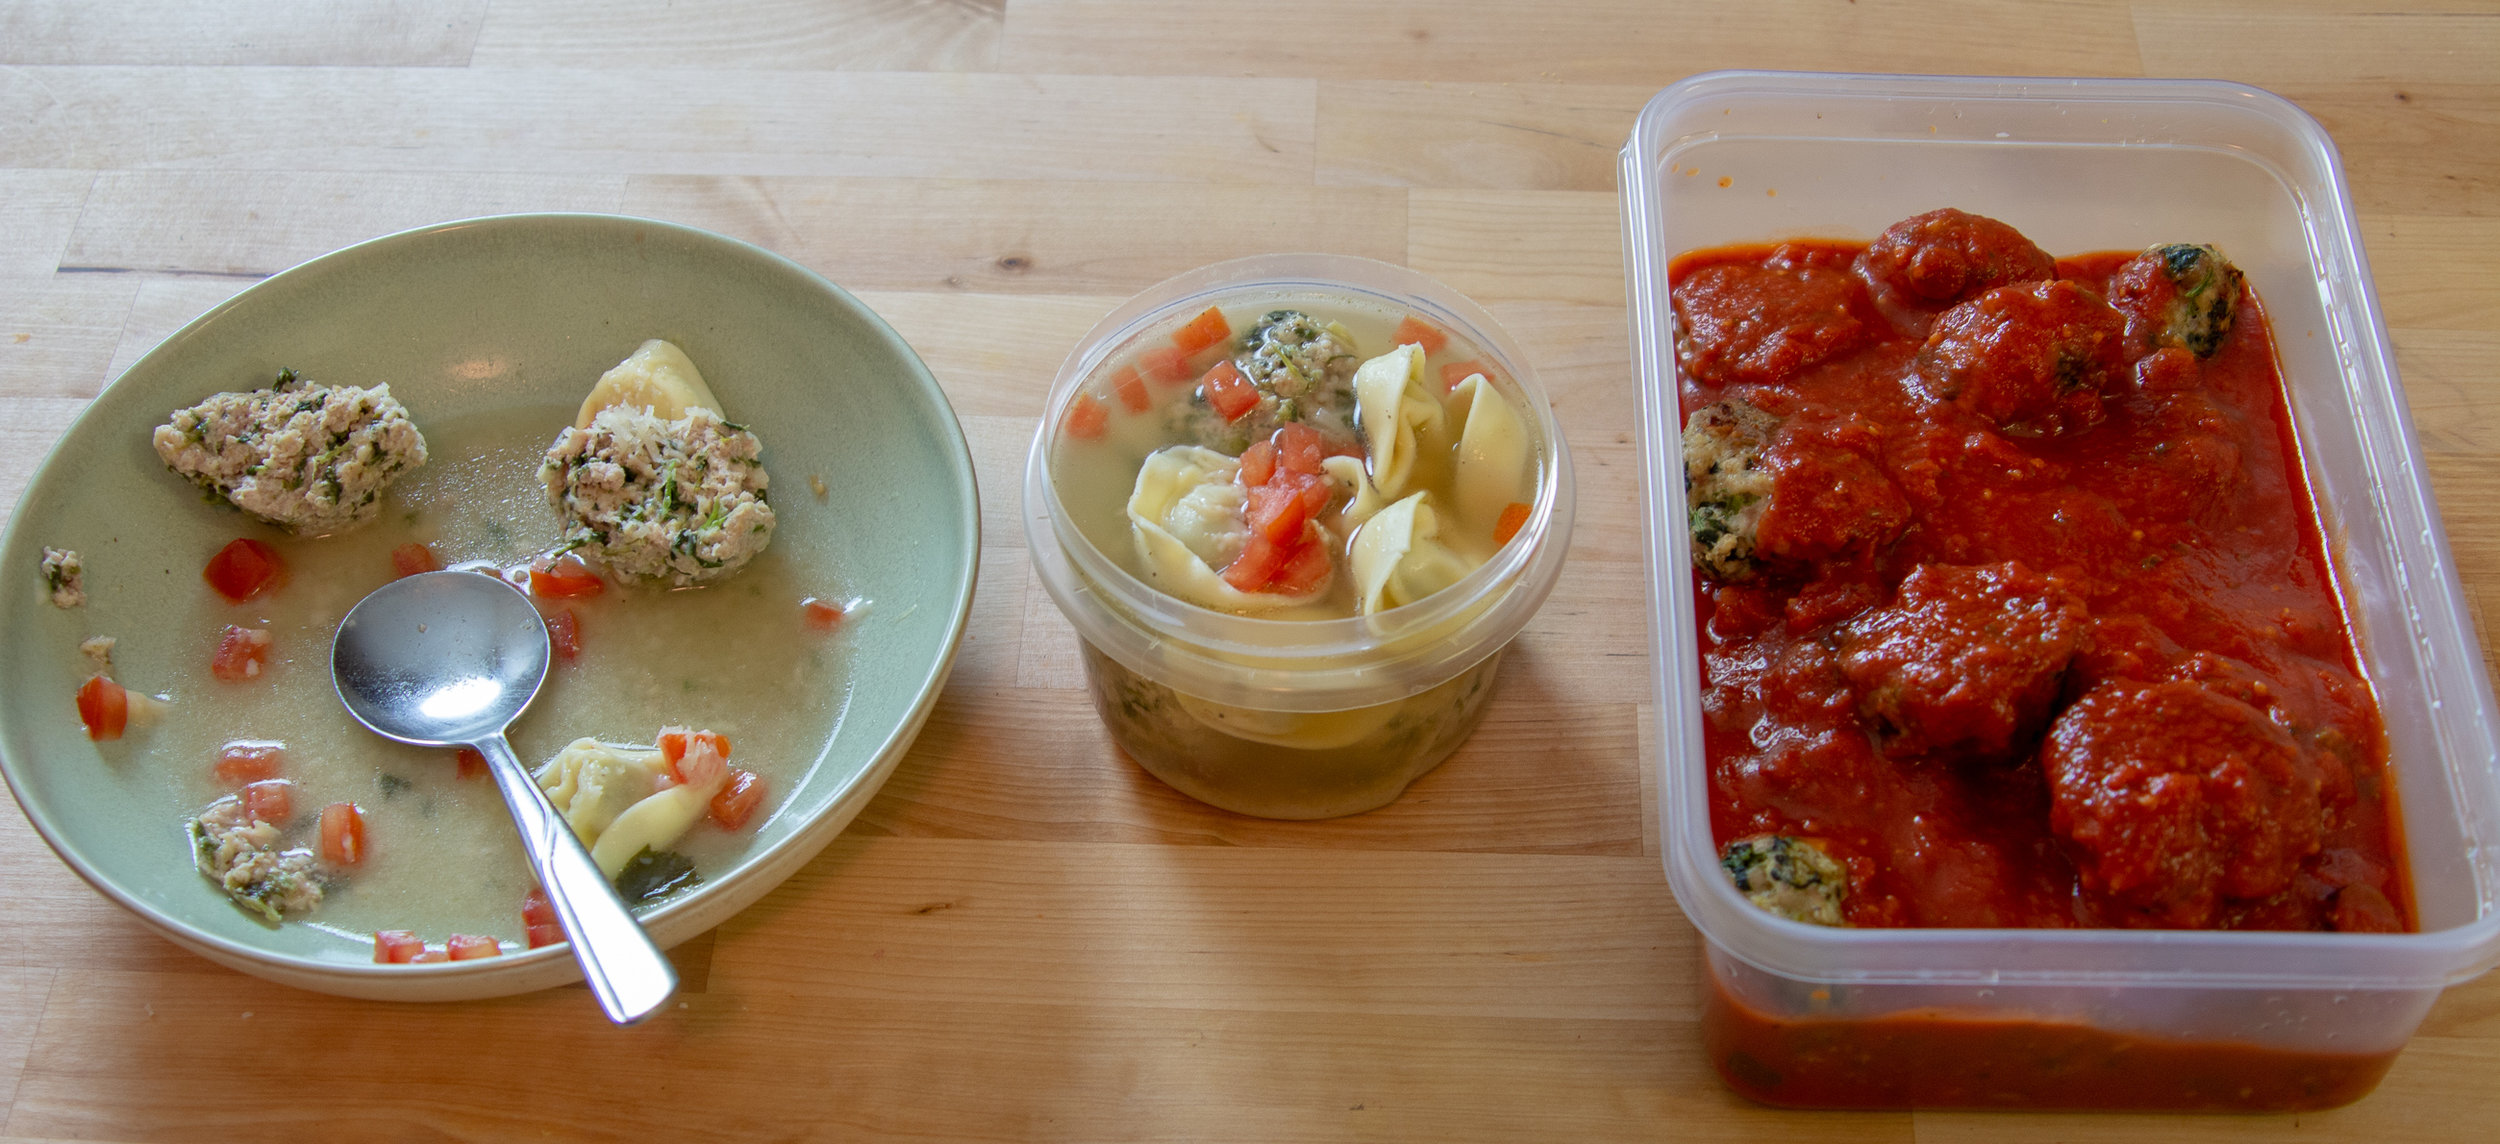  3 Stages of Meatballs - dinner today, lunch tomorrow, dinner for the future. 